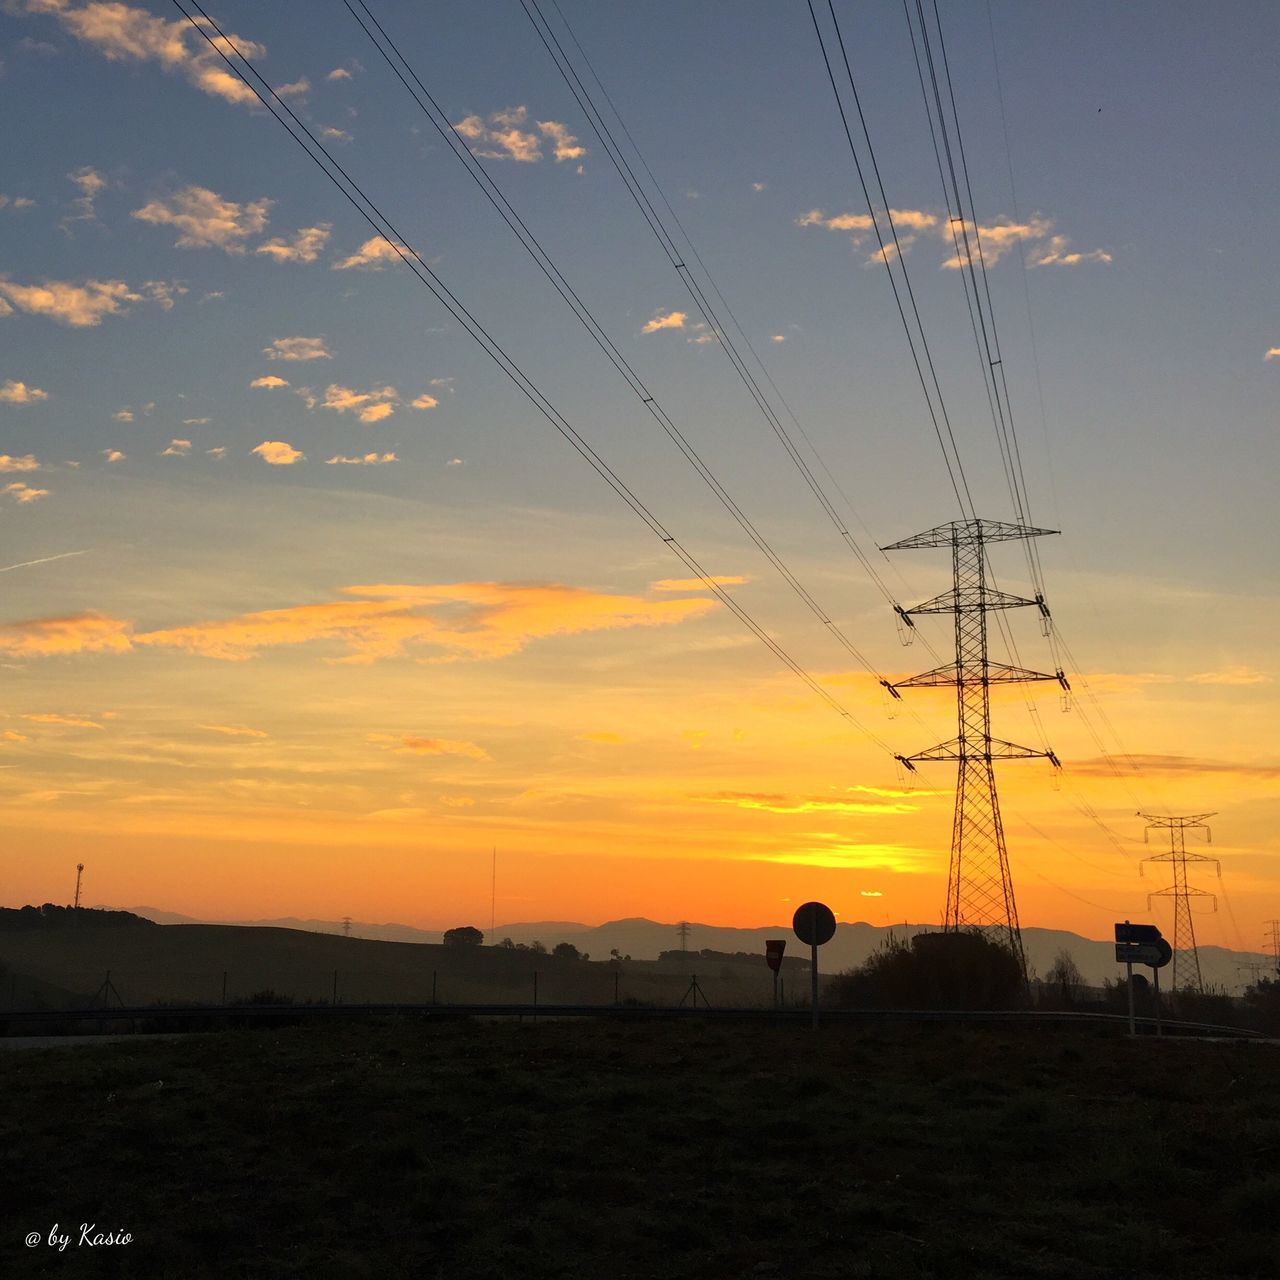 sunset, sky, electricity pylon, landscape, tranquility, scenics, power line, tranquil scene, orange color, field, beauty in nature, silhouette, fuel and power generation, nature, electricity, power supply, idyllic, cloud, cloud - sky, technology